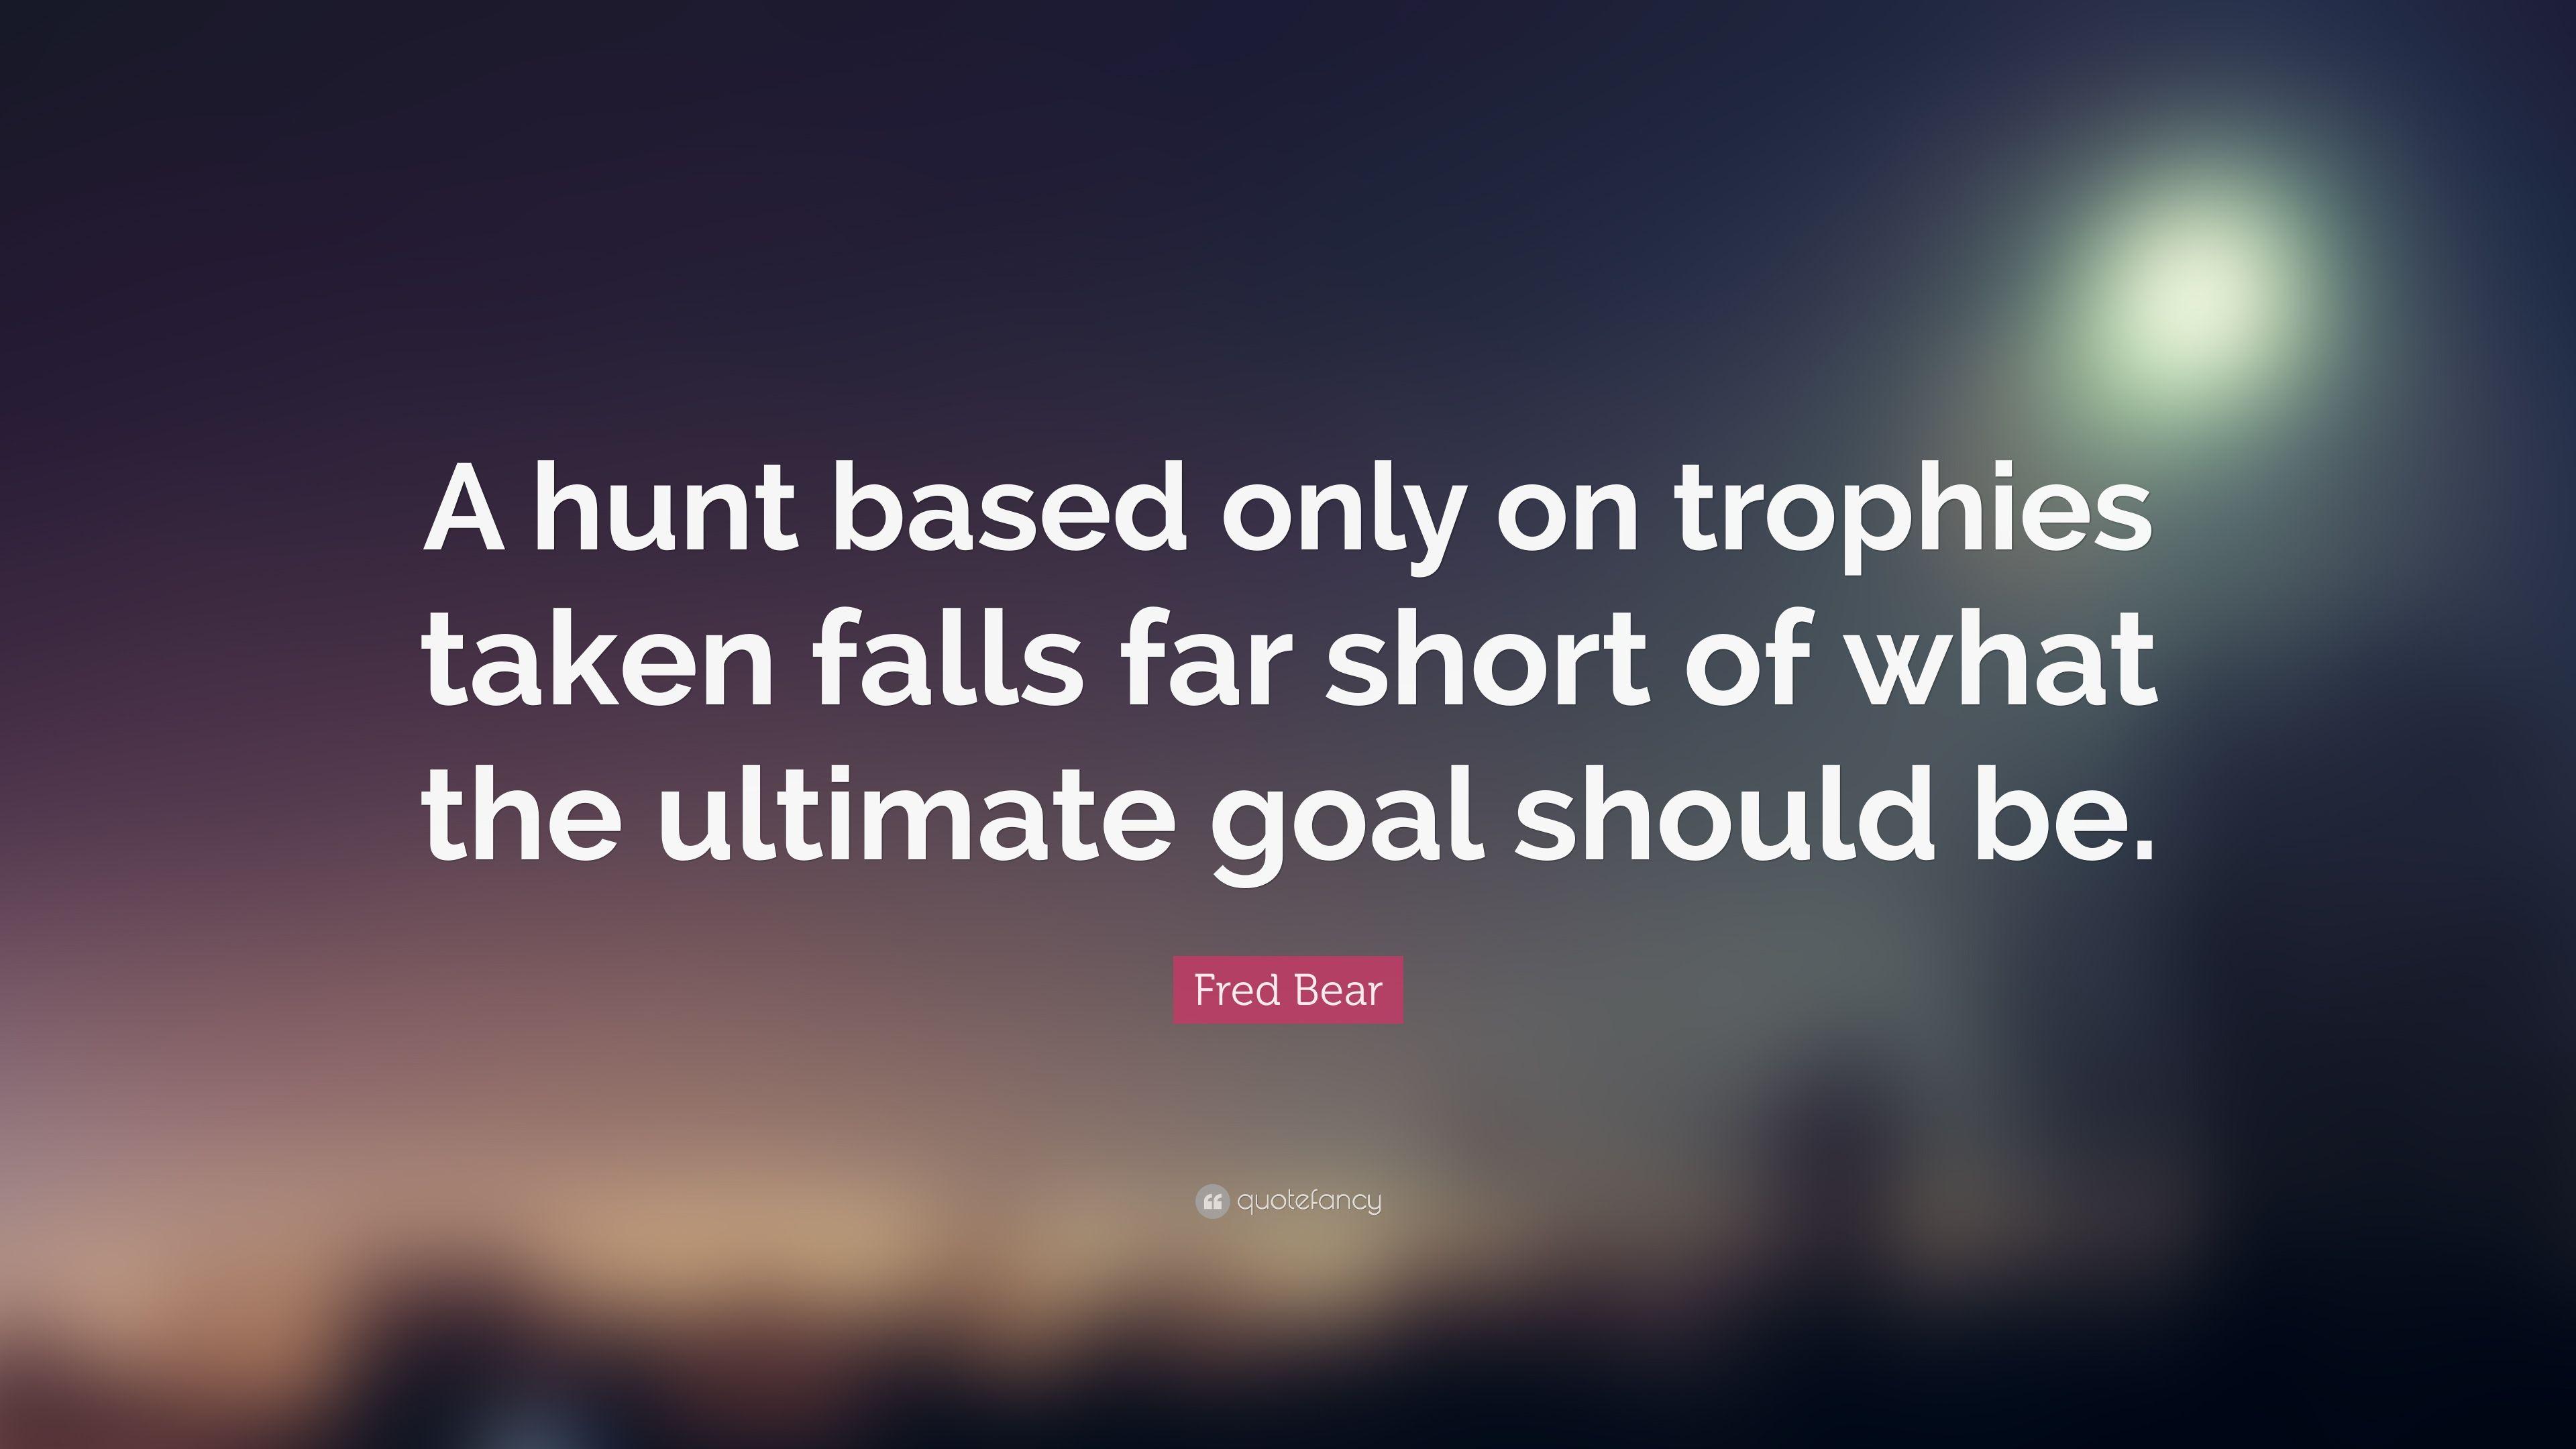 Fred Bear Quote: “A hunt based only on trophies taken falls far